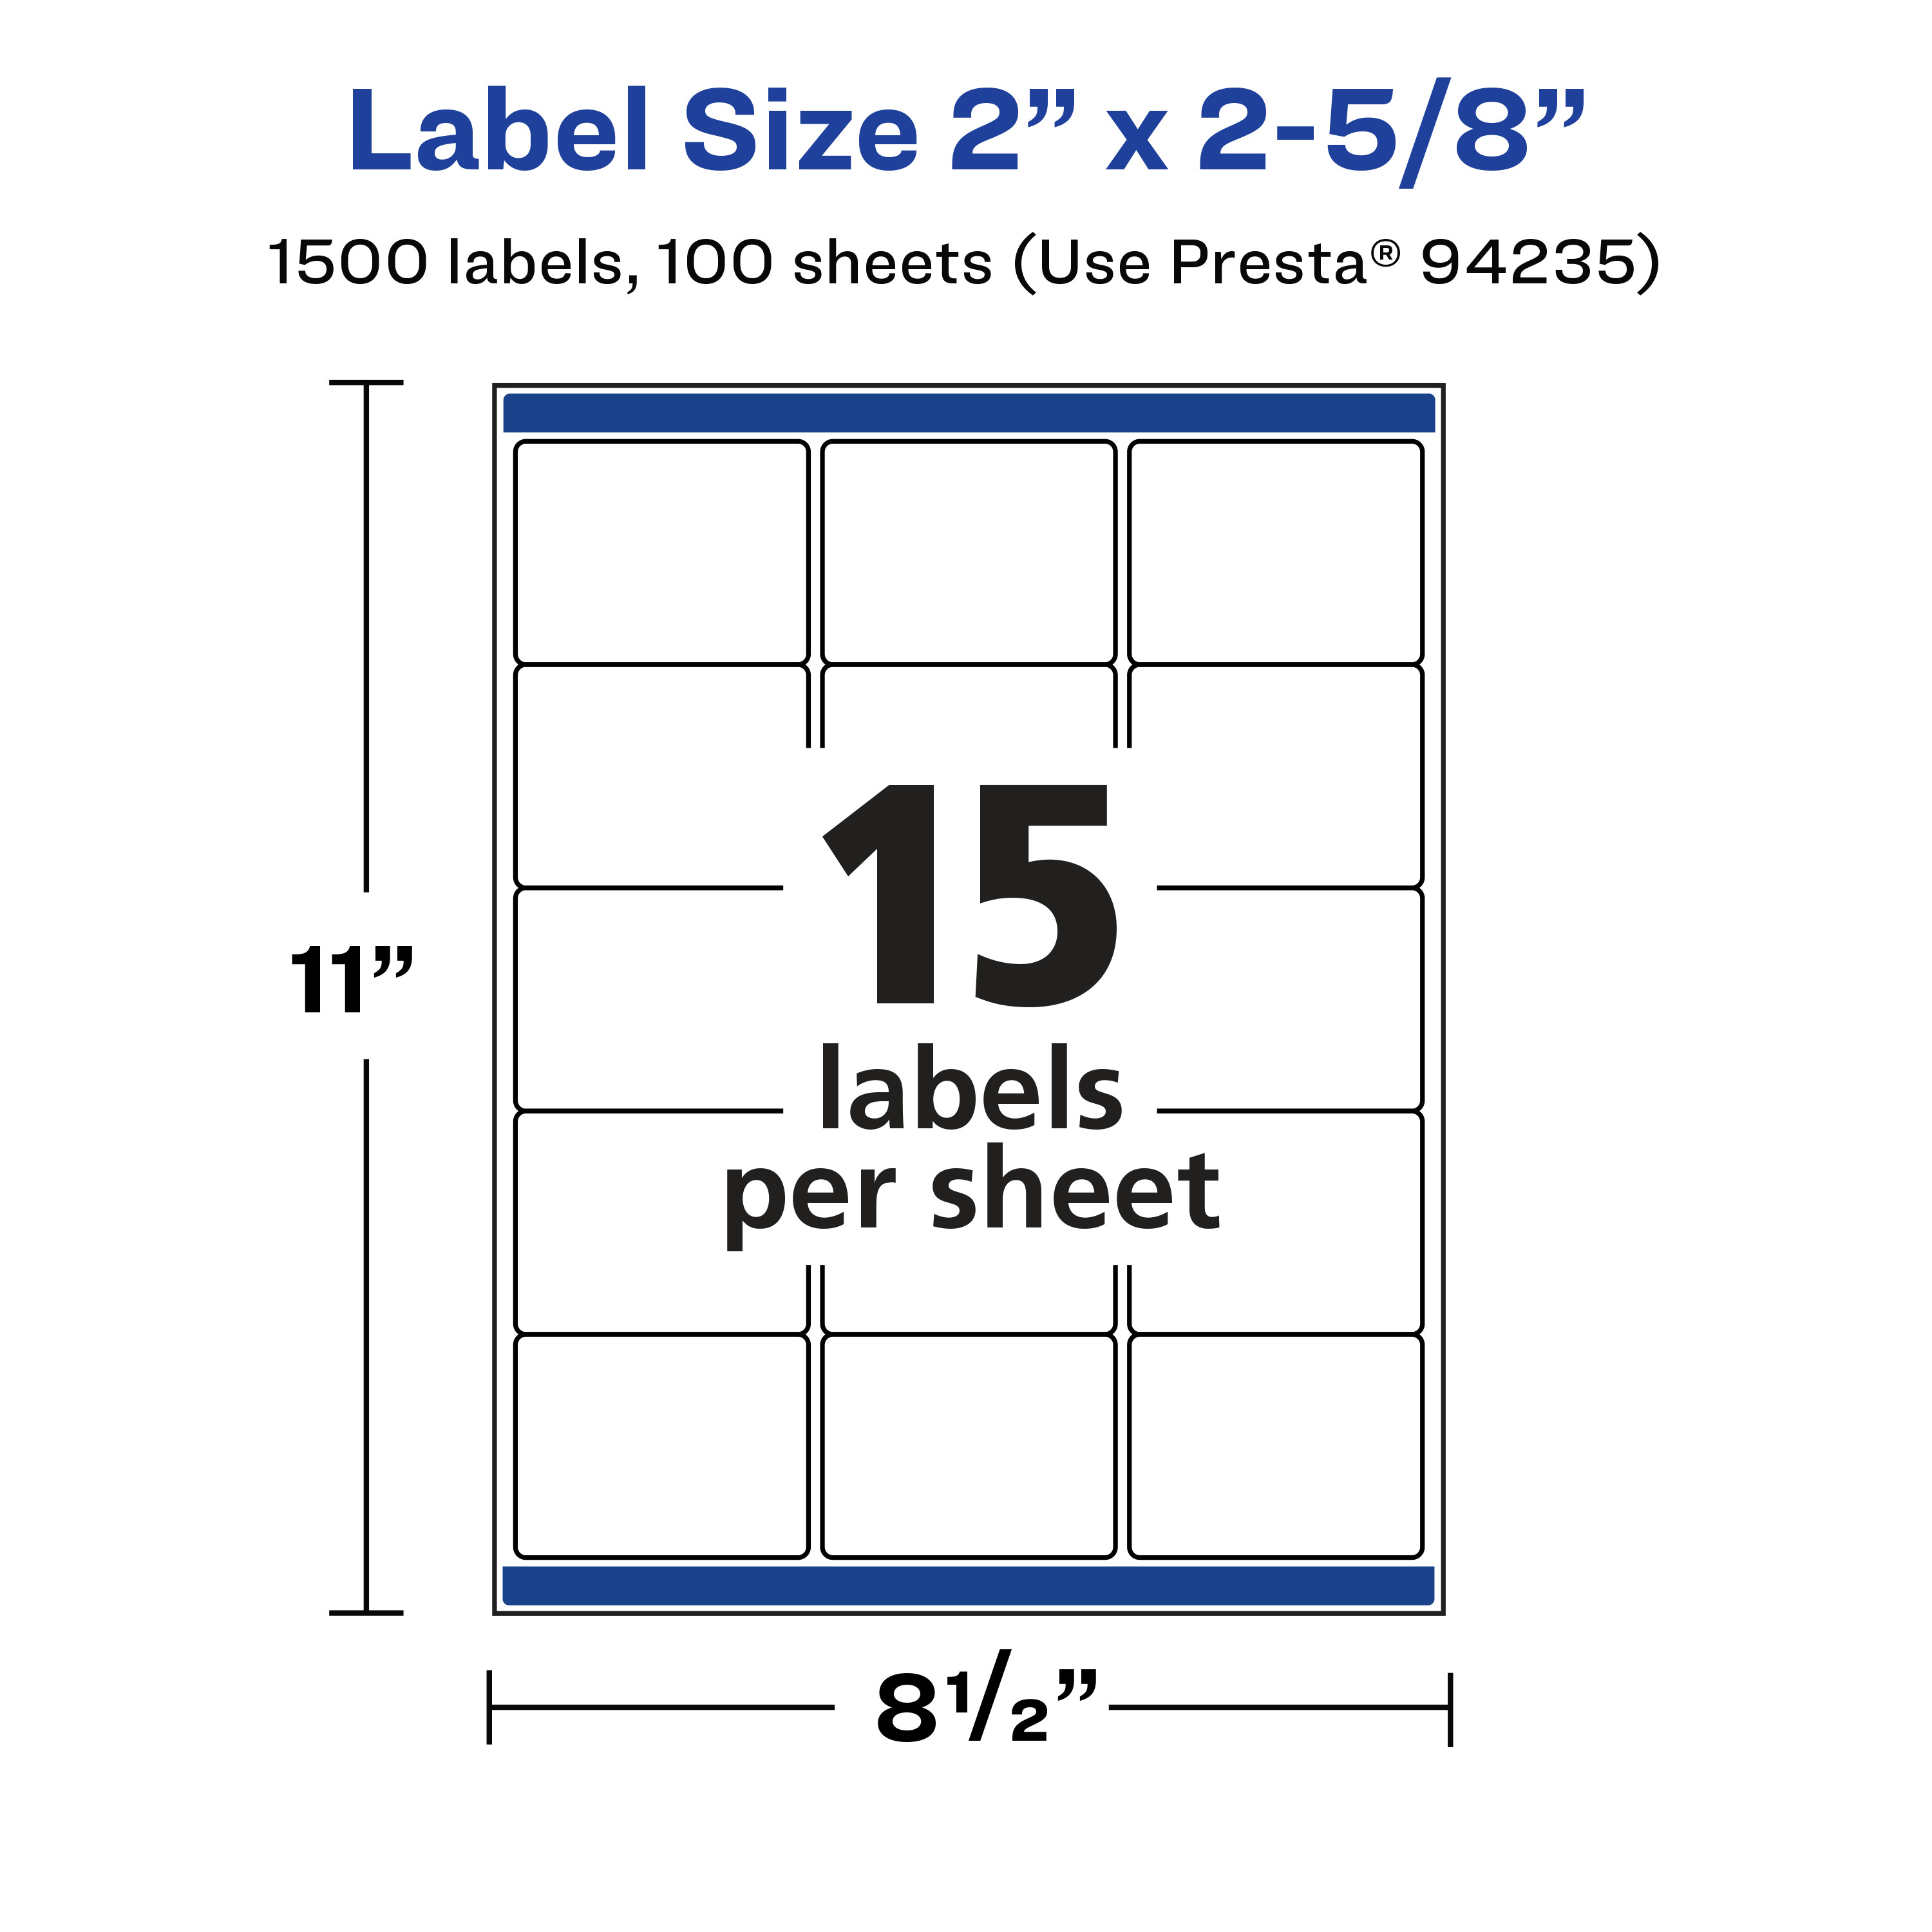 White Weatherproof Laser Shipping Labels, x 2-5 8, 1500 Pack - 3